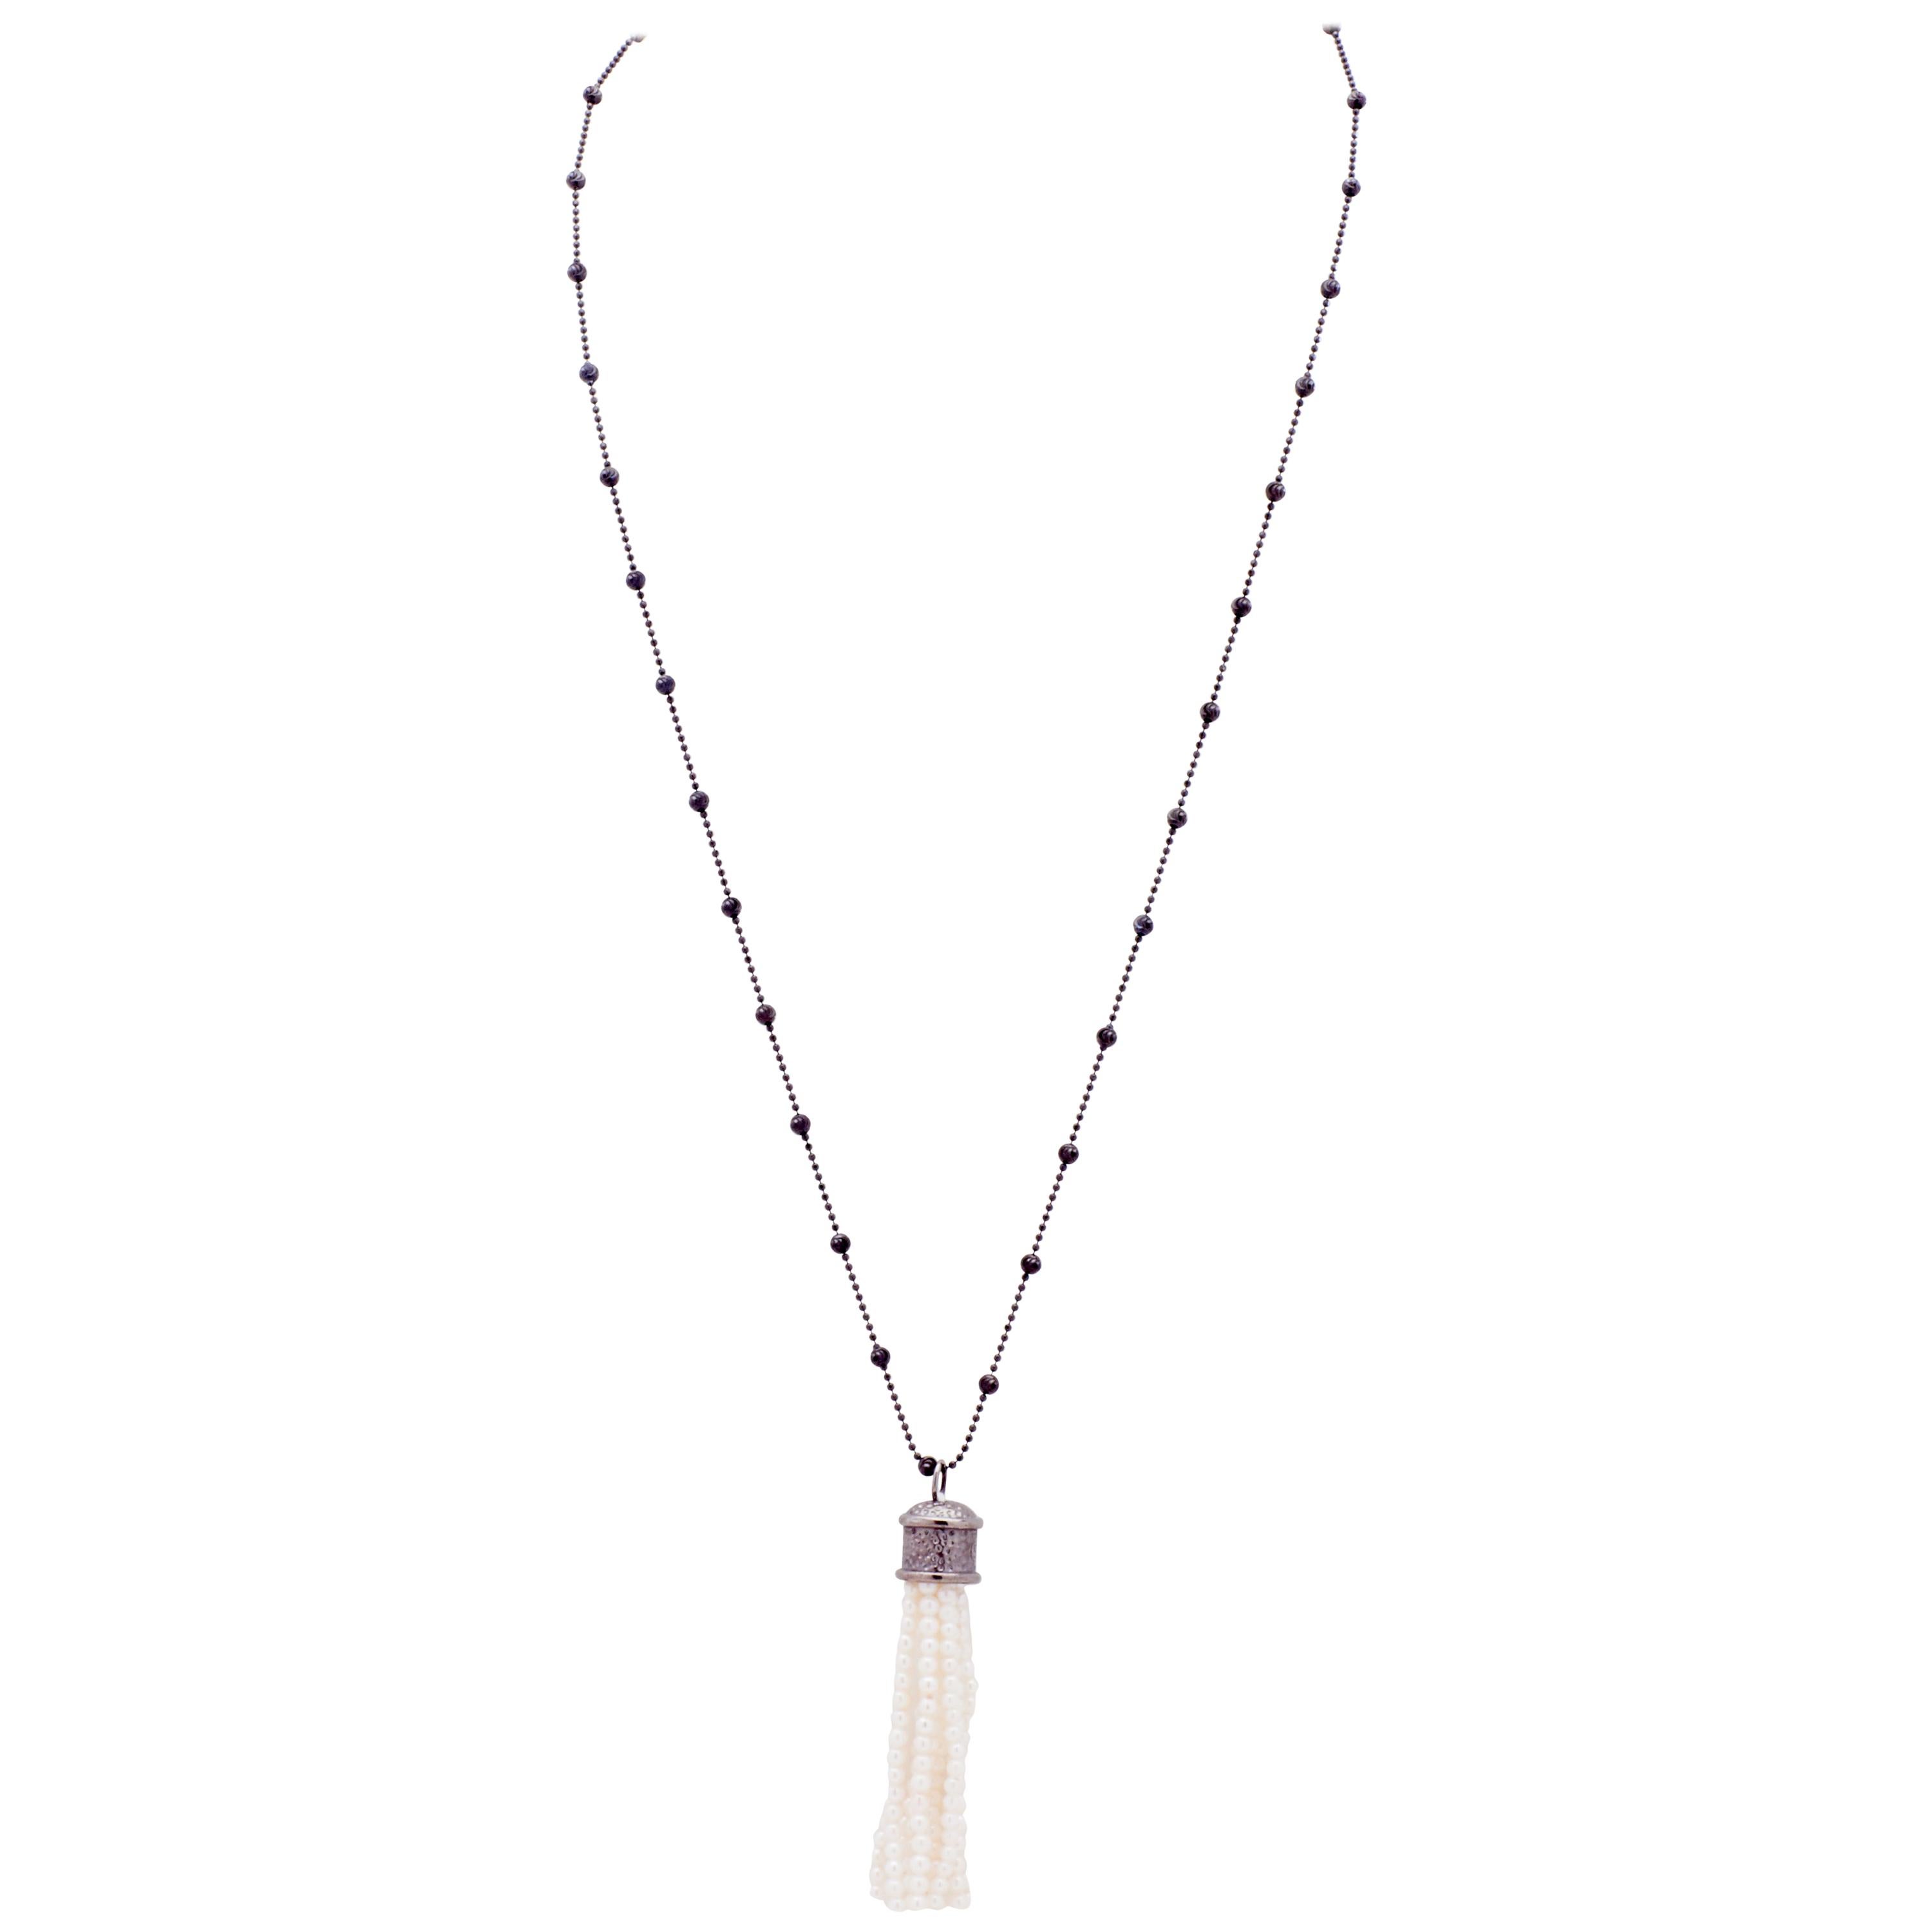 Black Sterling Silver Chain Necklace with Genuine Akoya Pearl Tassel 